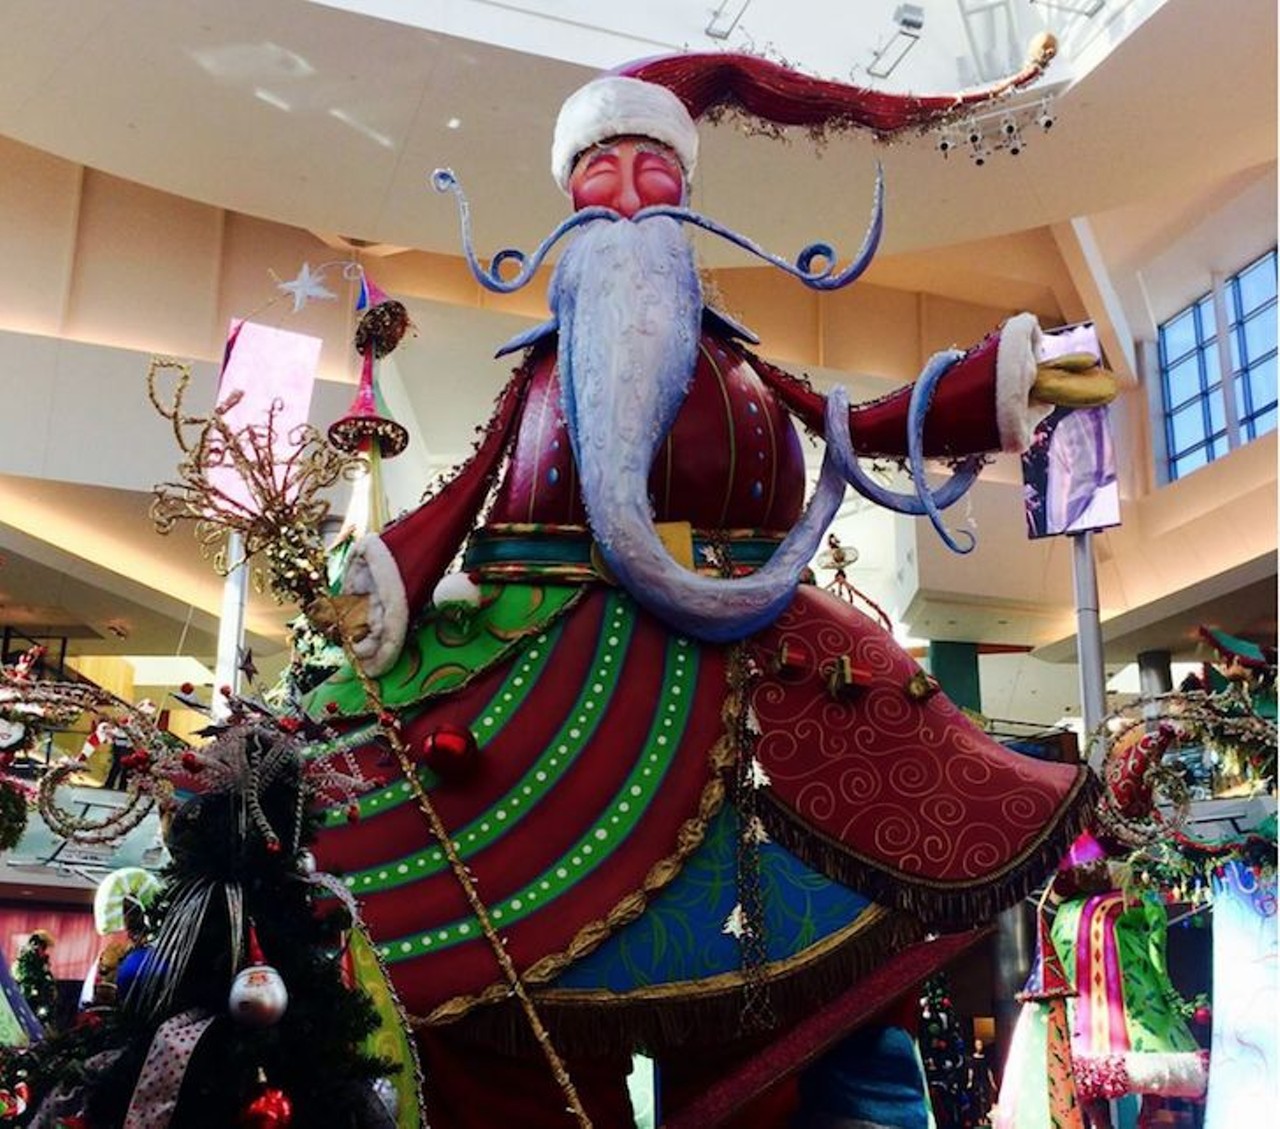 Santa Photo Experience at Mall at Millenia
4200 Conroy Rd; 407-363-3555
Take some time out of your Christmas shopping to meet and take photos with Santa Claus at Orlando&#146;s fanciest mall. Open every day through Dec. 24 during mall hours.
Photo via Mall at Millenia/Facebook